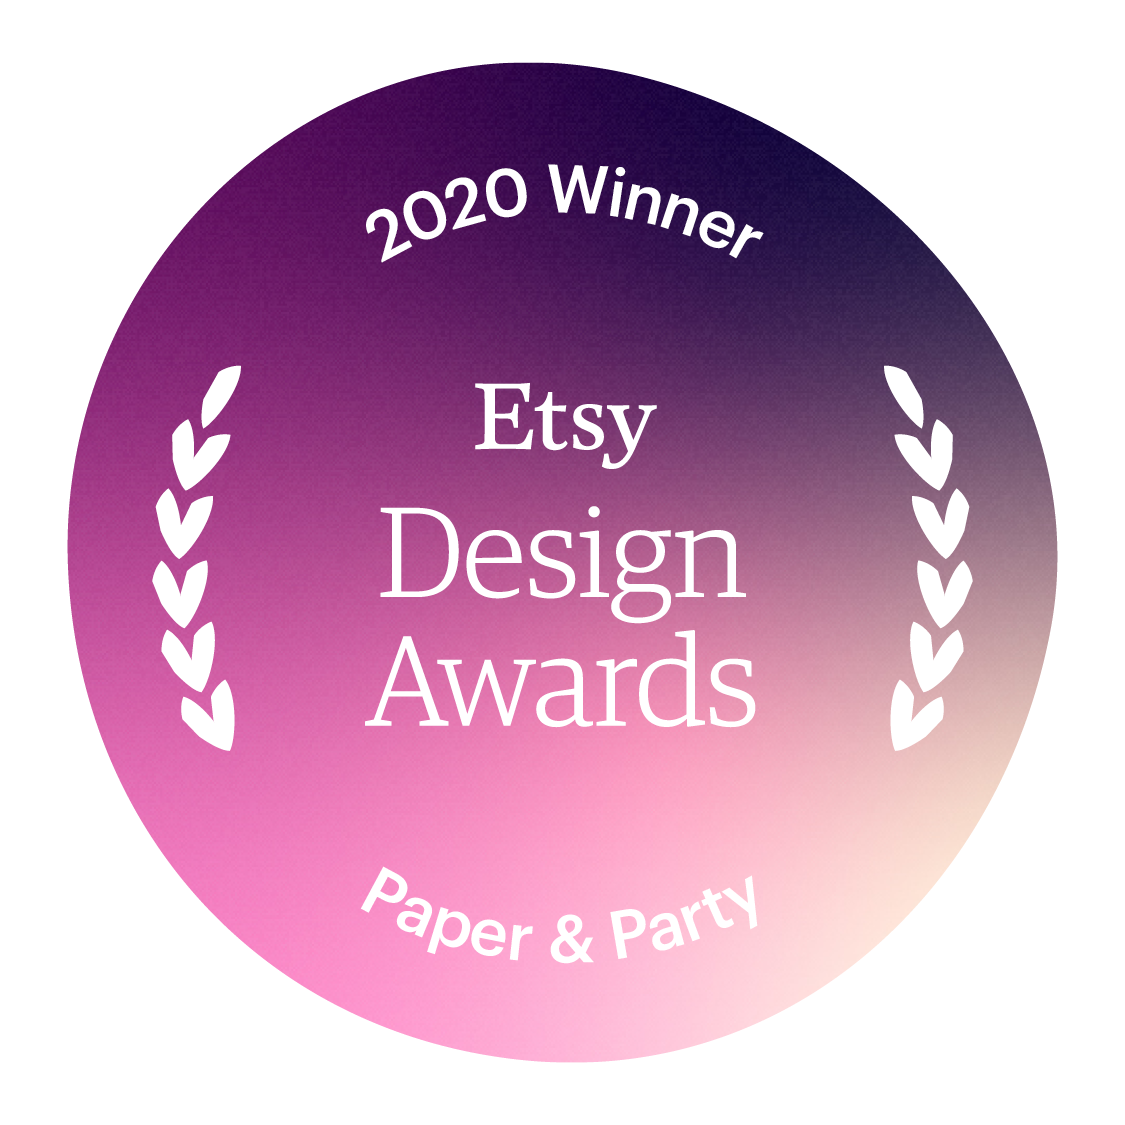 Paper & Party Category Winner: Etsy Design Awards 2020